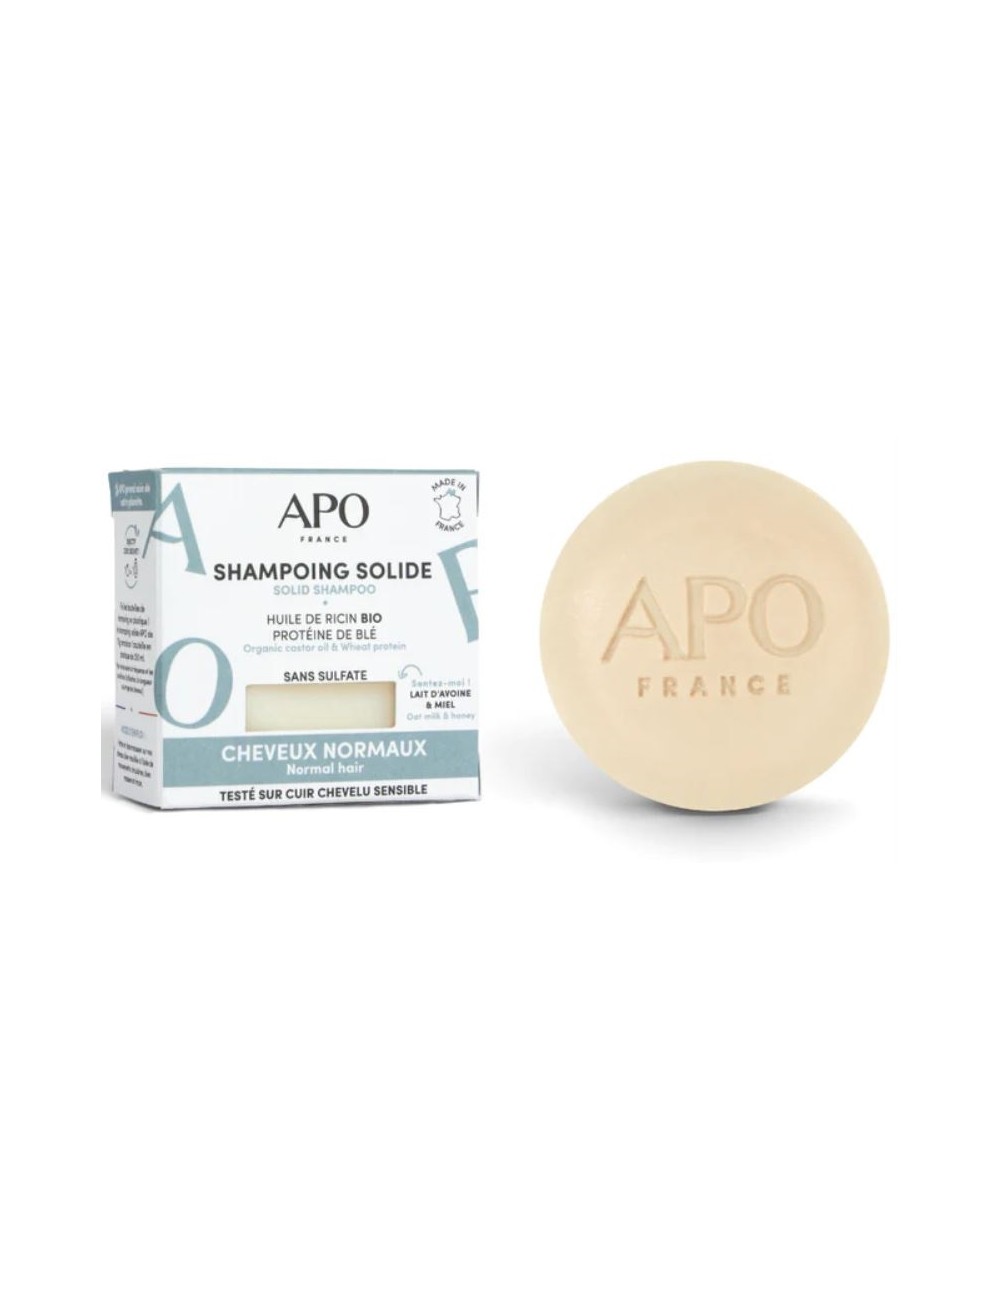 Shampoing solide Apo France Shampoing solide – Cheveux normaux pas cher  BA eShop